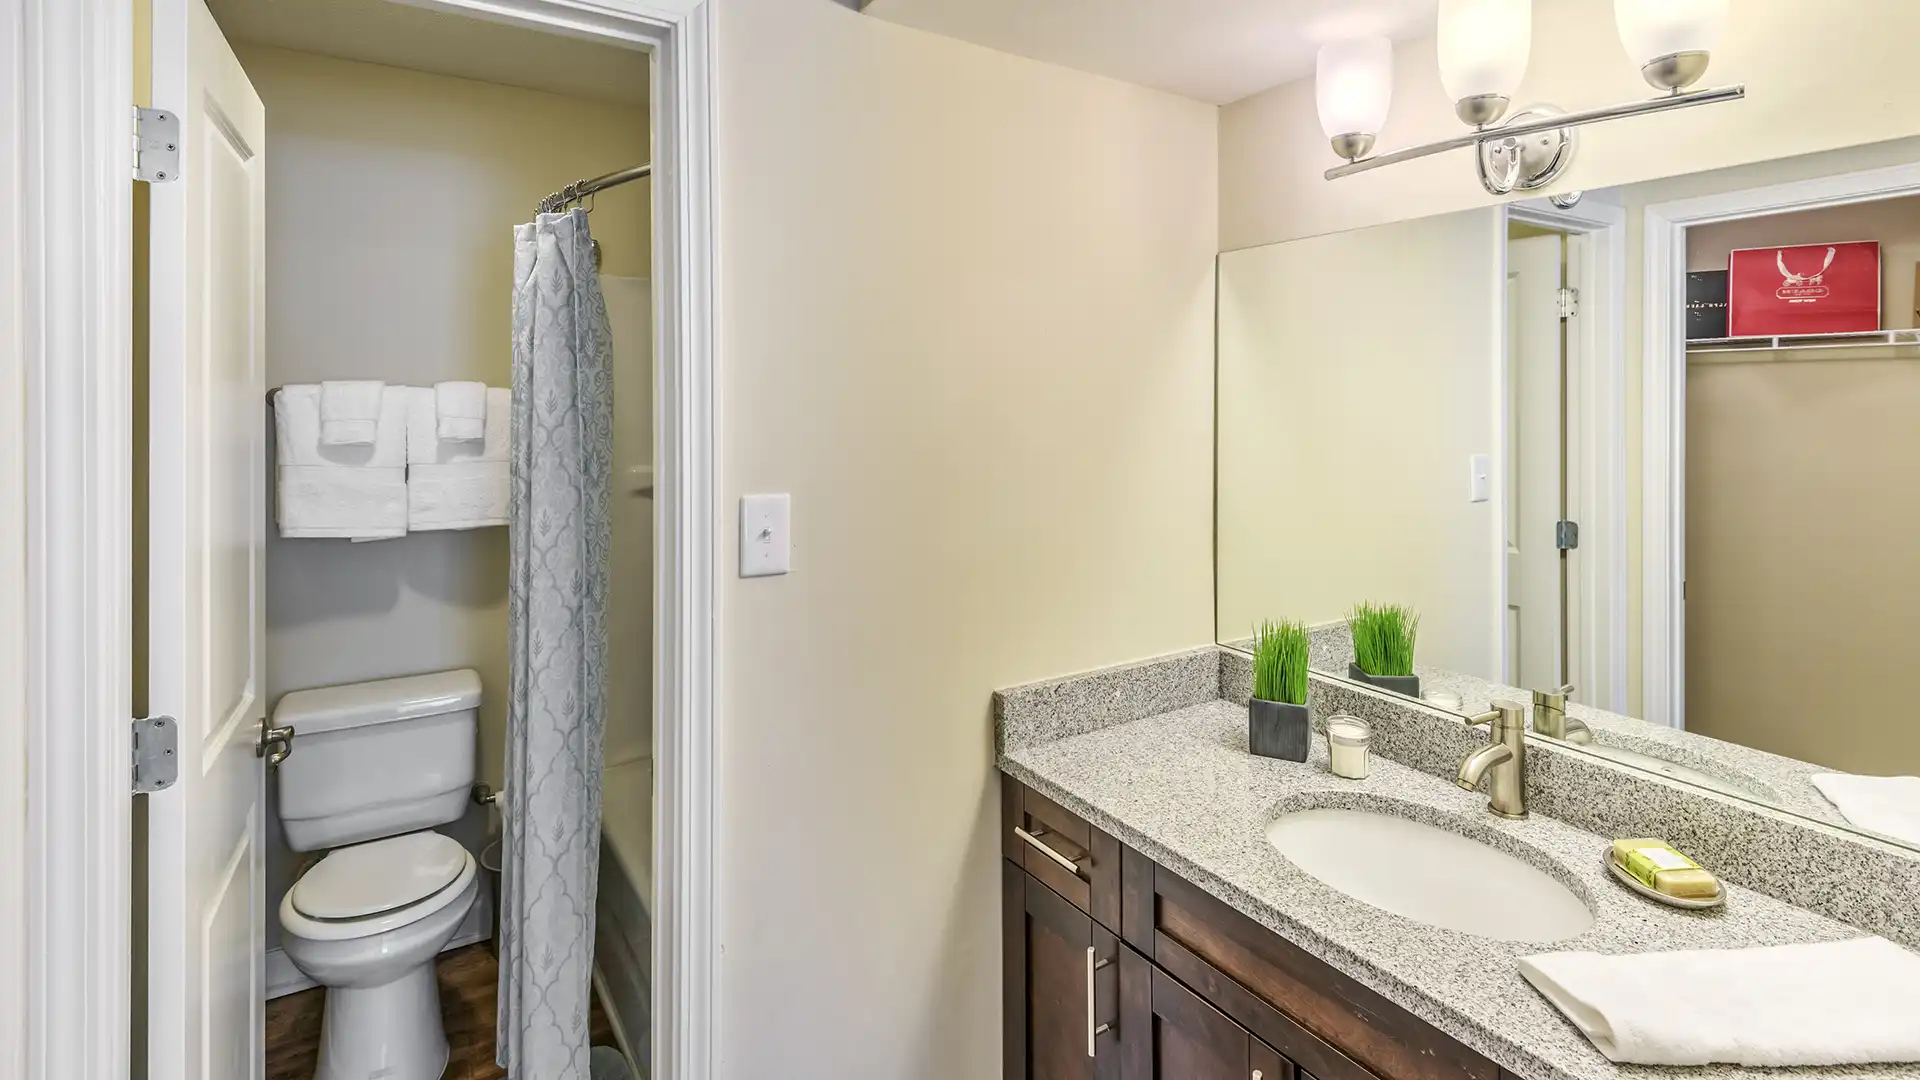 ample lighting and Granite Counters in Baths